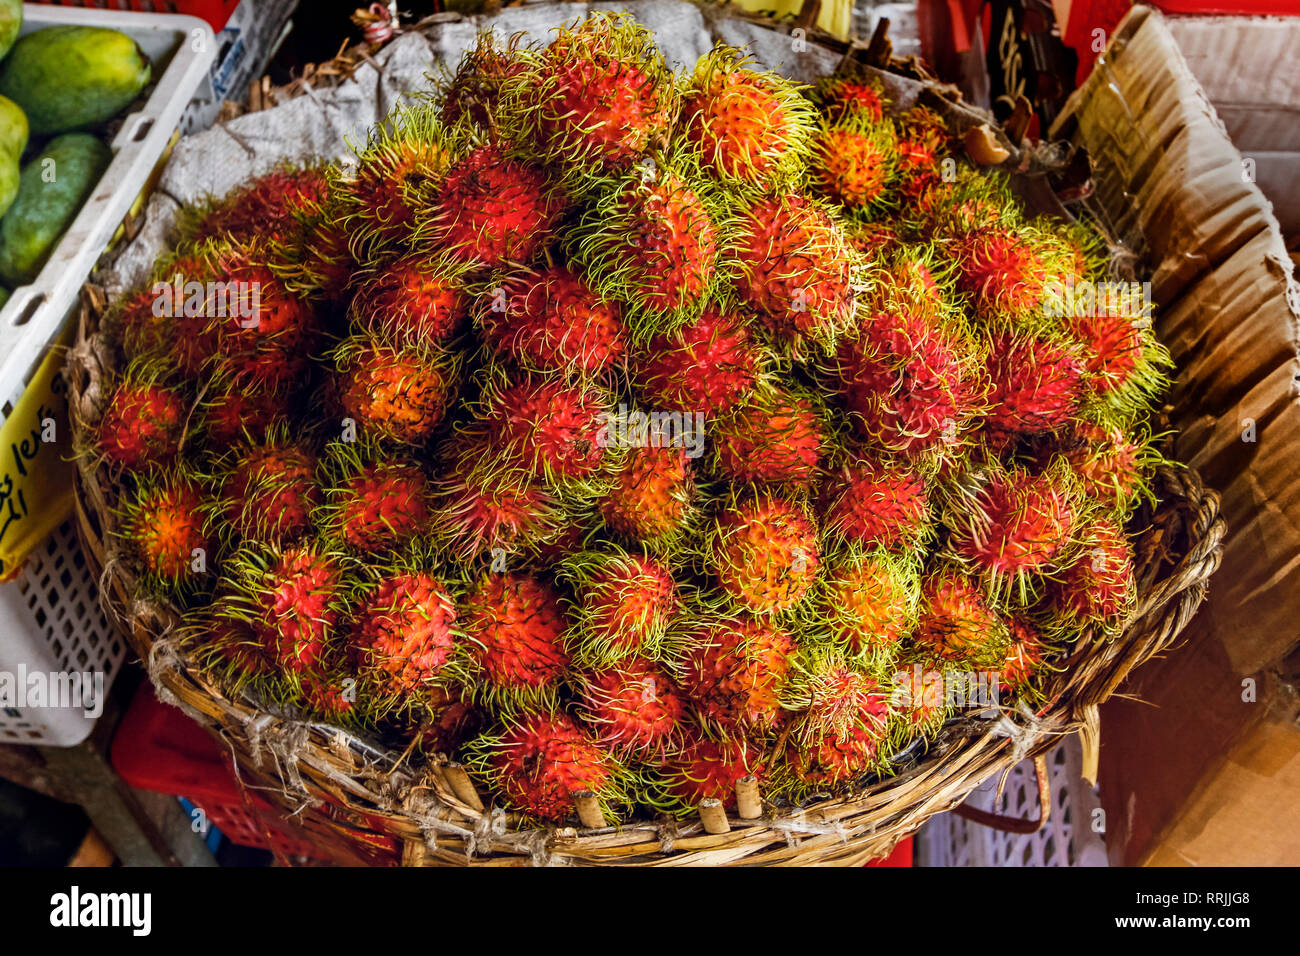 Rambutans, a popular tropical fruit named after the Malay word for hairy, Central Market, city centre, Phnom Penh, Cambodia, Indochina Stock Photo